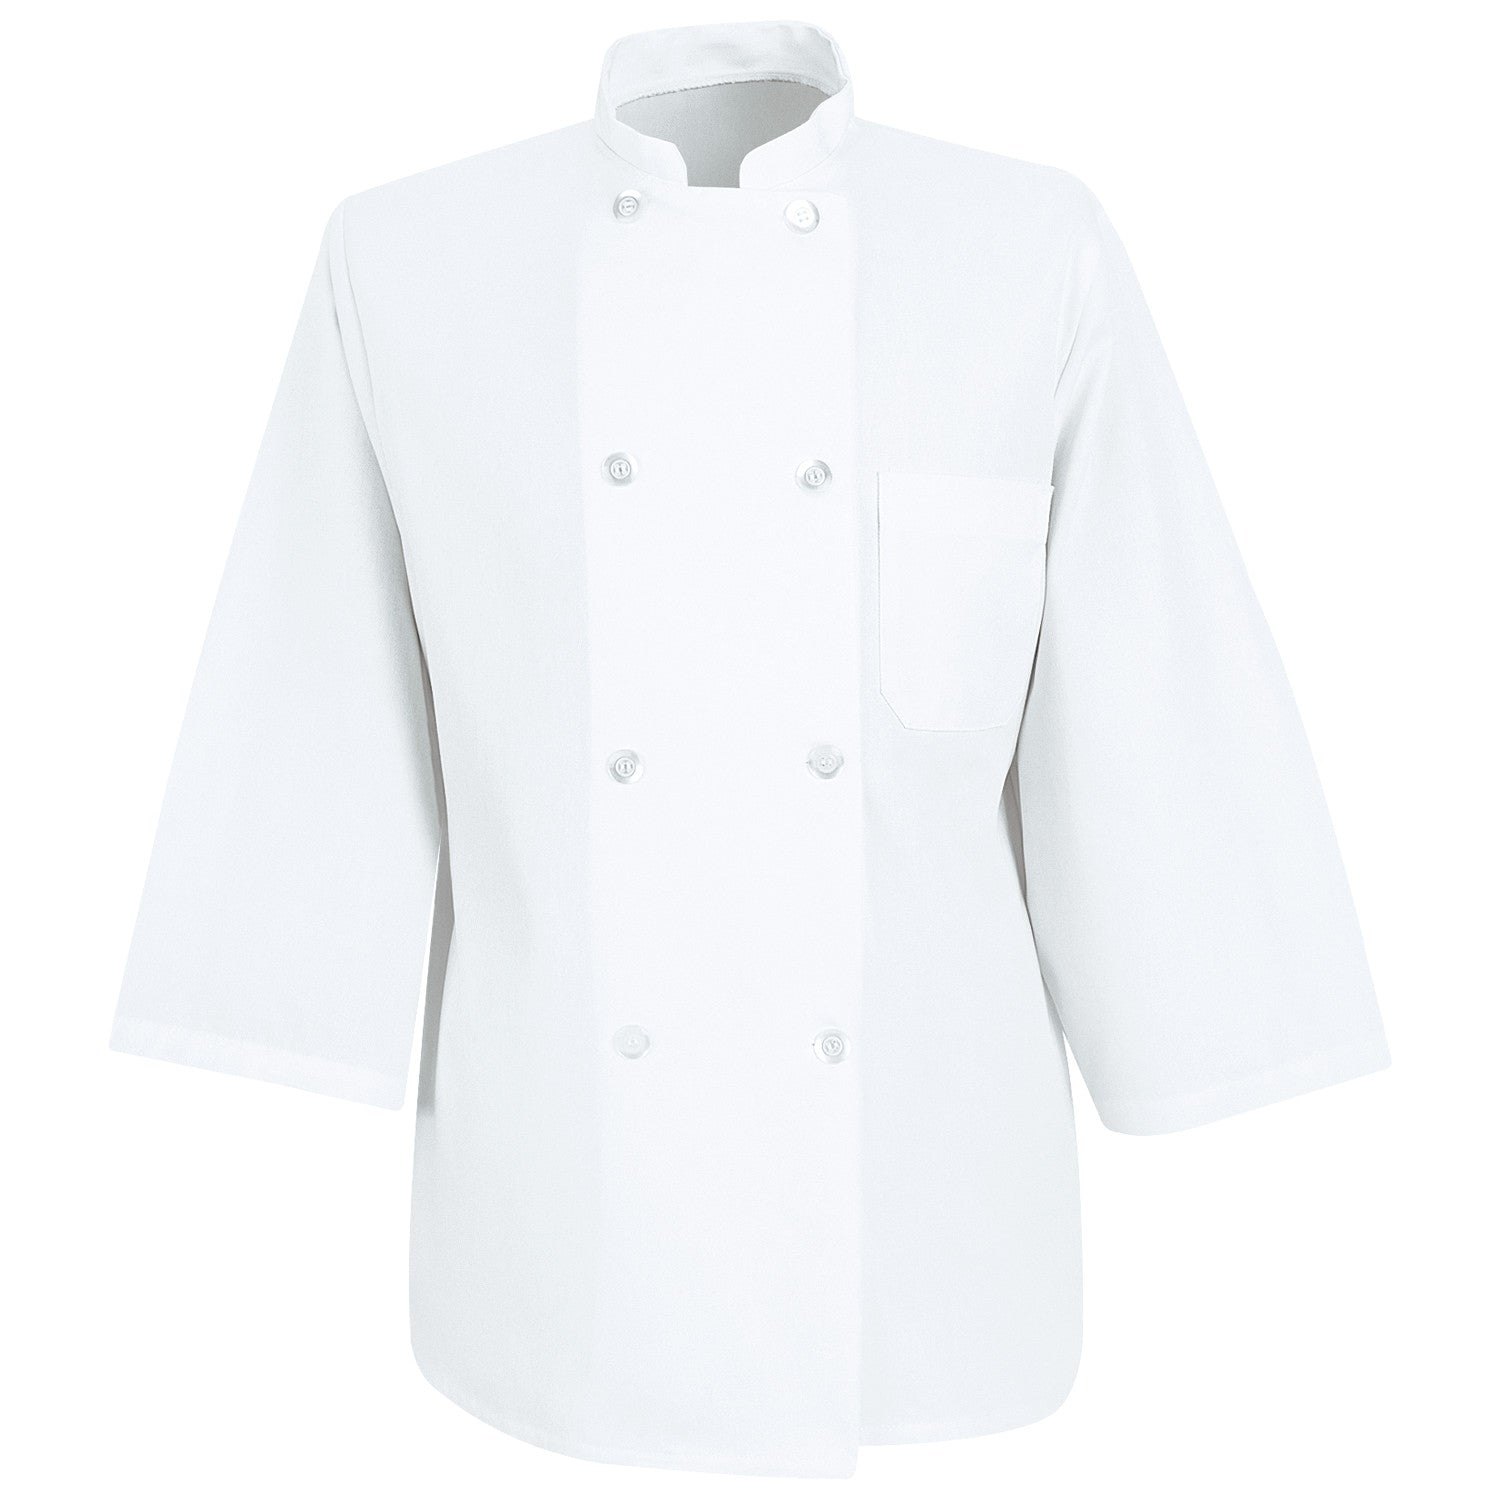 ¾ Sleeve Chef Coat 0402 - White-eSafety Supplies, Inc